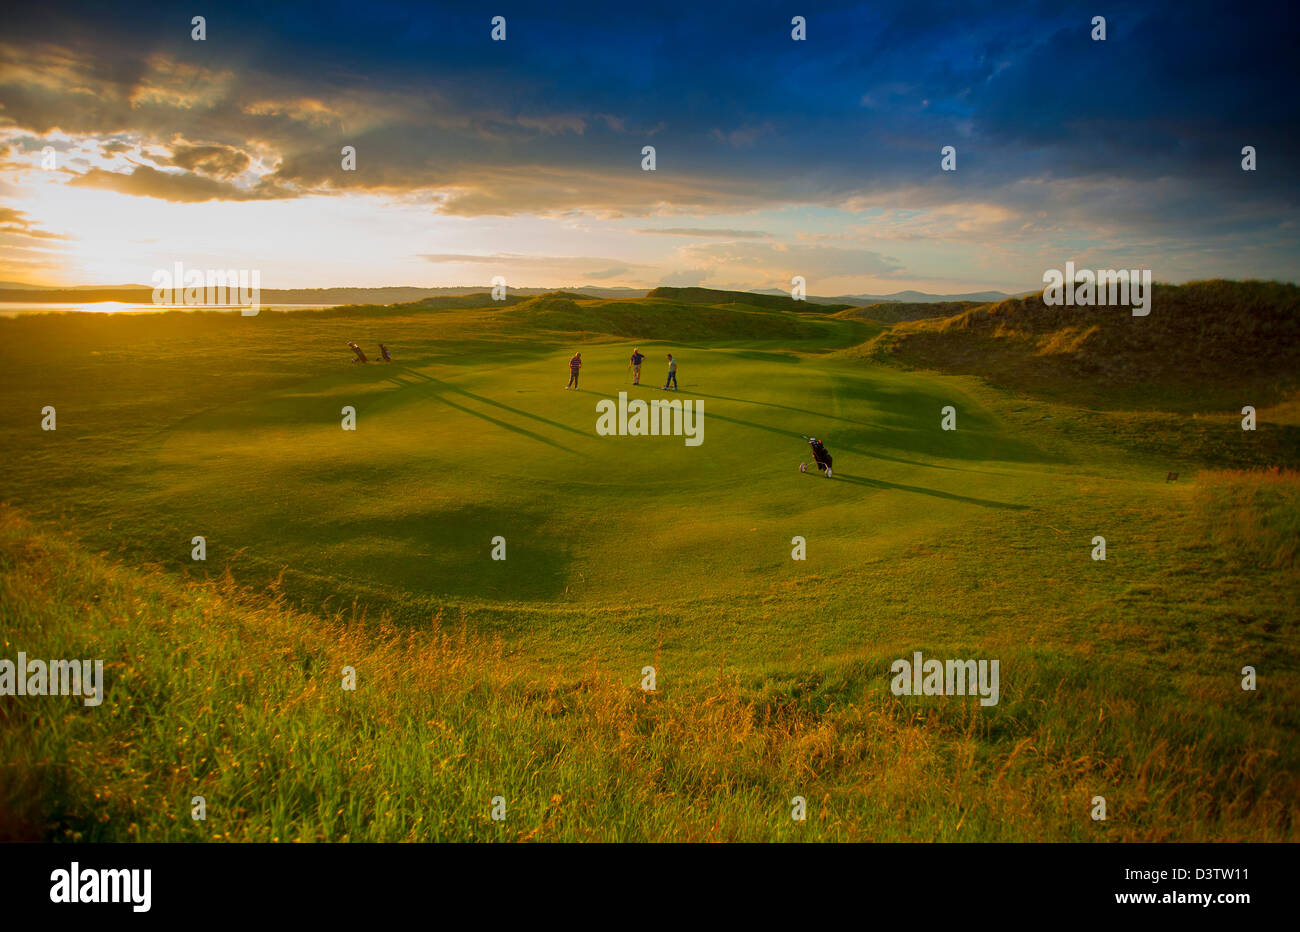 Golfers at sunset with players putting, long shadows across the golf course Green and heavy skies. Stock Photo